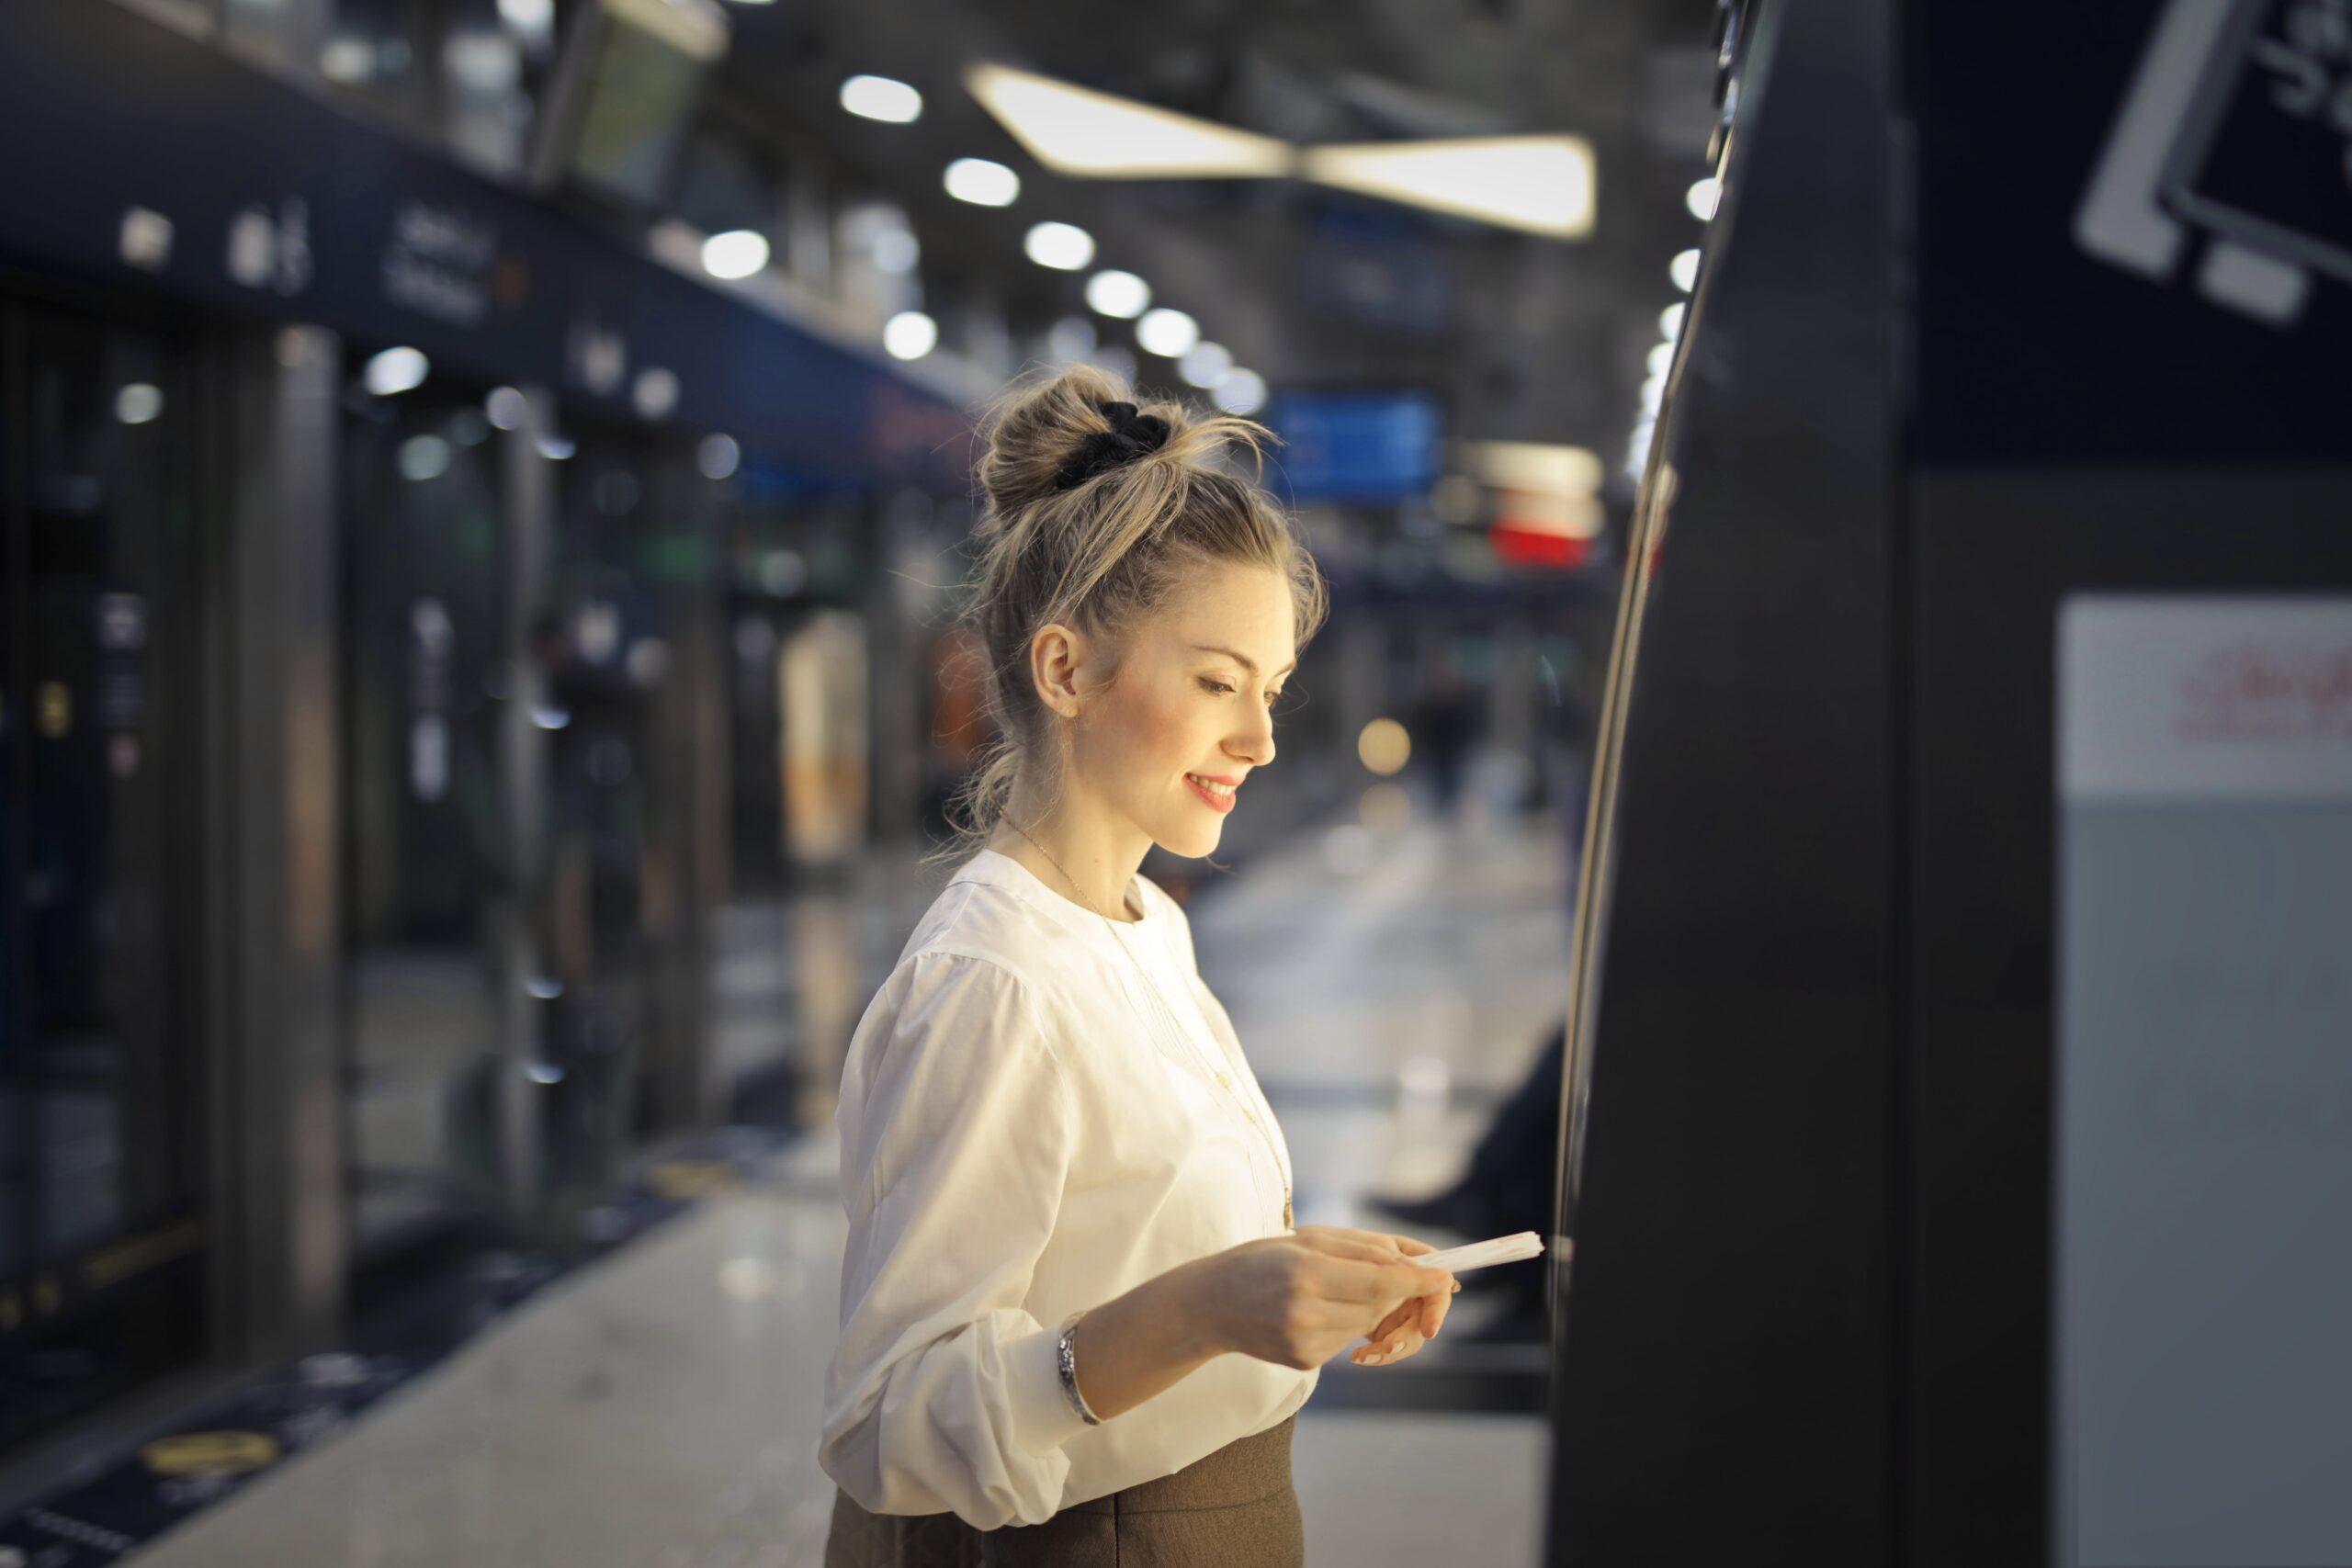 Digital Signage - How Successful Have Self-Service Kiosks Been in Your Market?